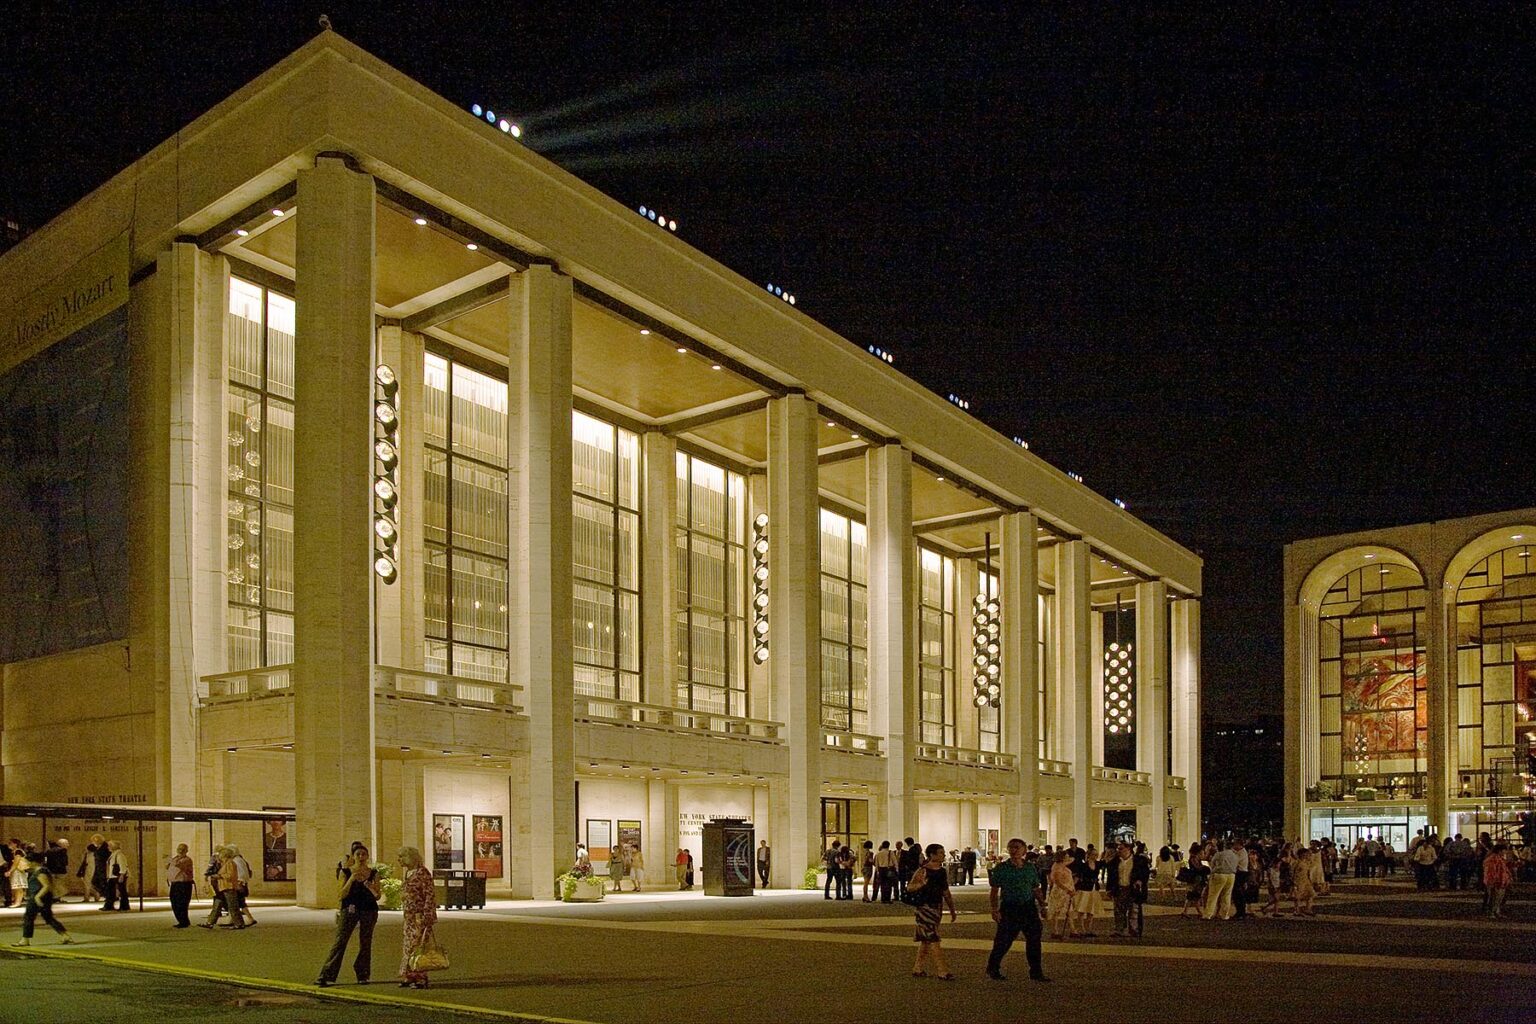 The COURTYARD and MAIN HALL of LINCOLN CENTER at night - NEW YORK CITY